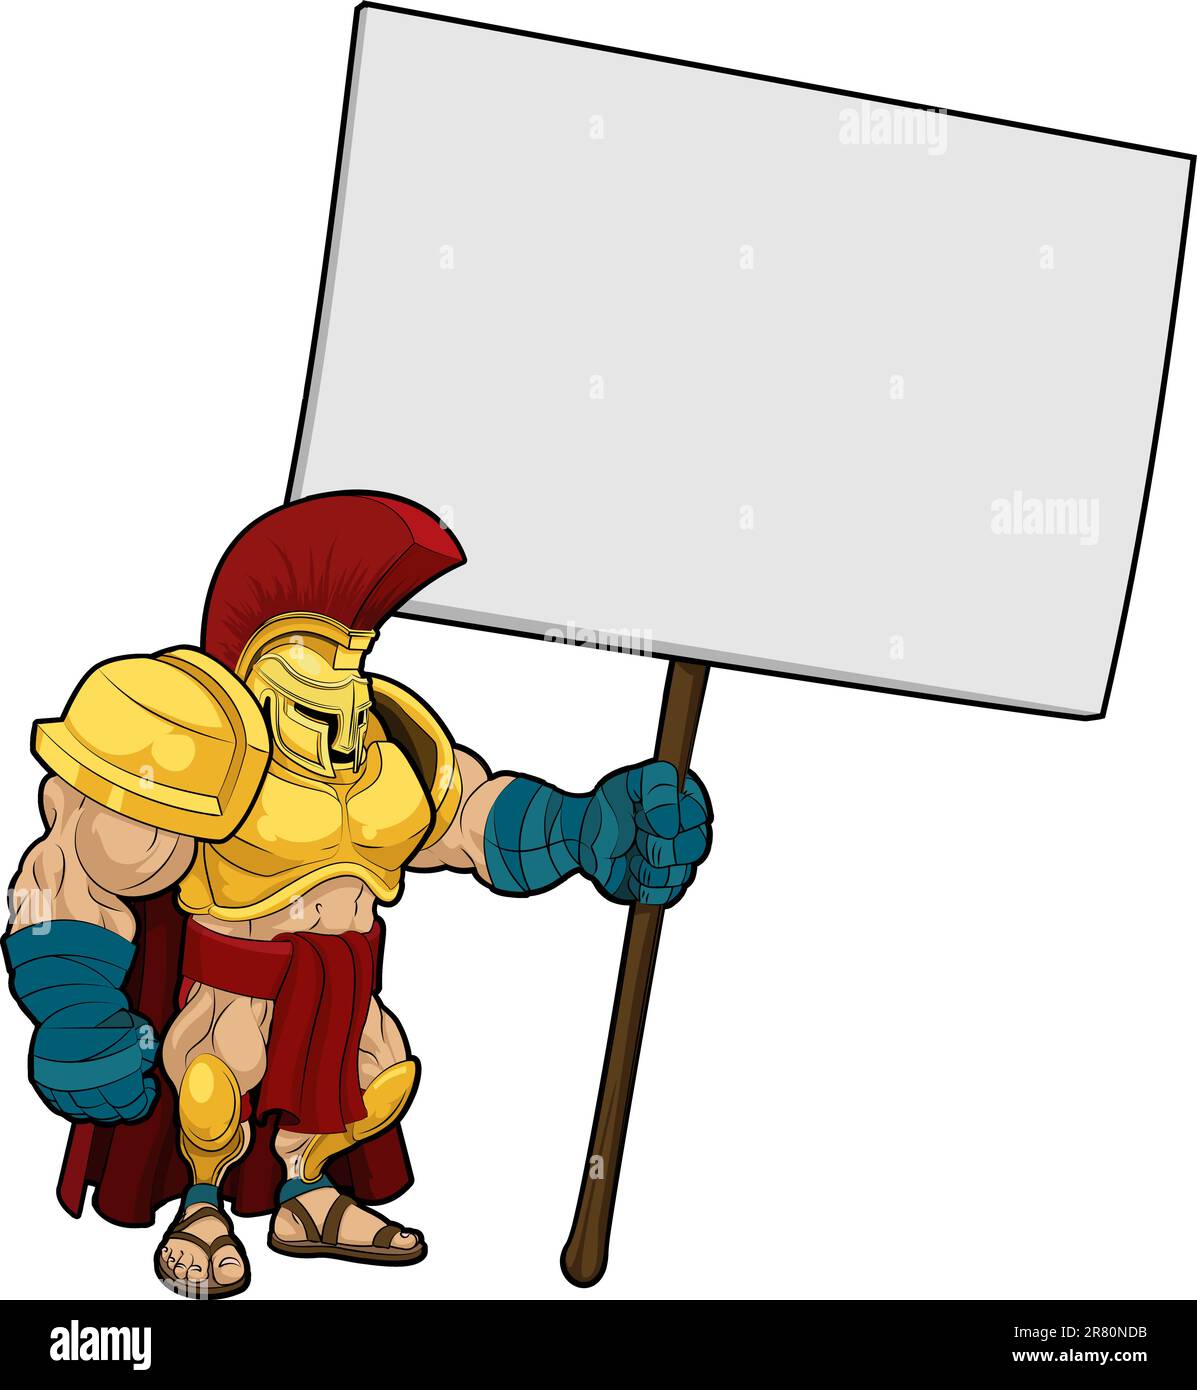 Cartoon illustration of a tough looking Spartan or Trojan soldier holding a sign board Stock Vector